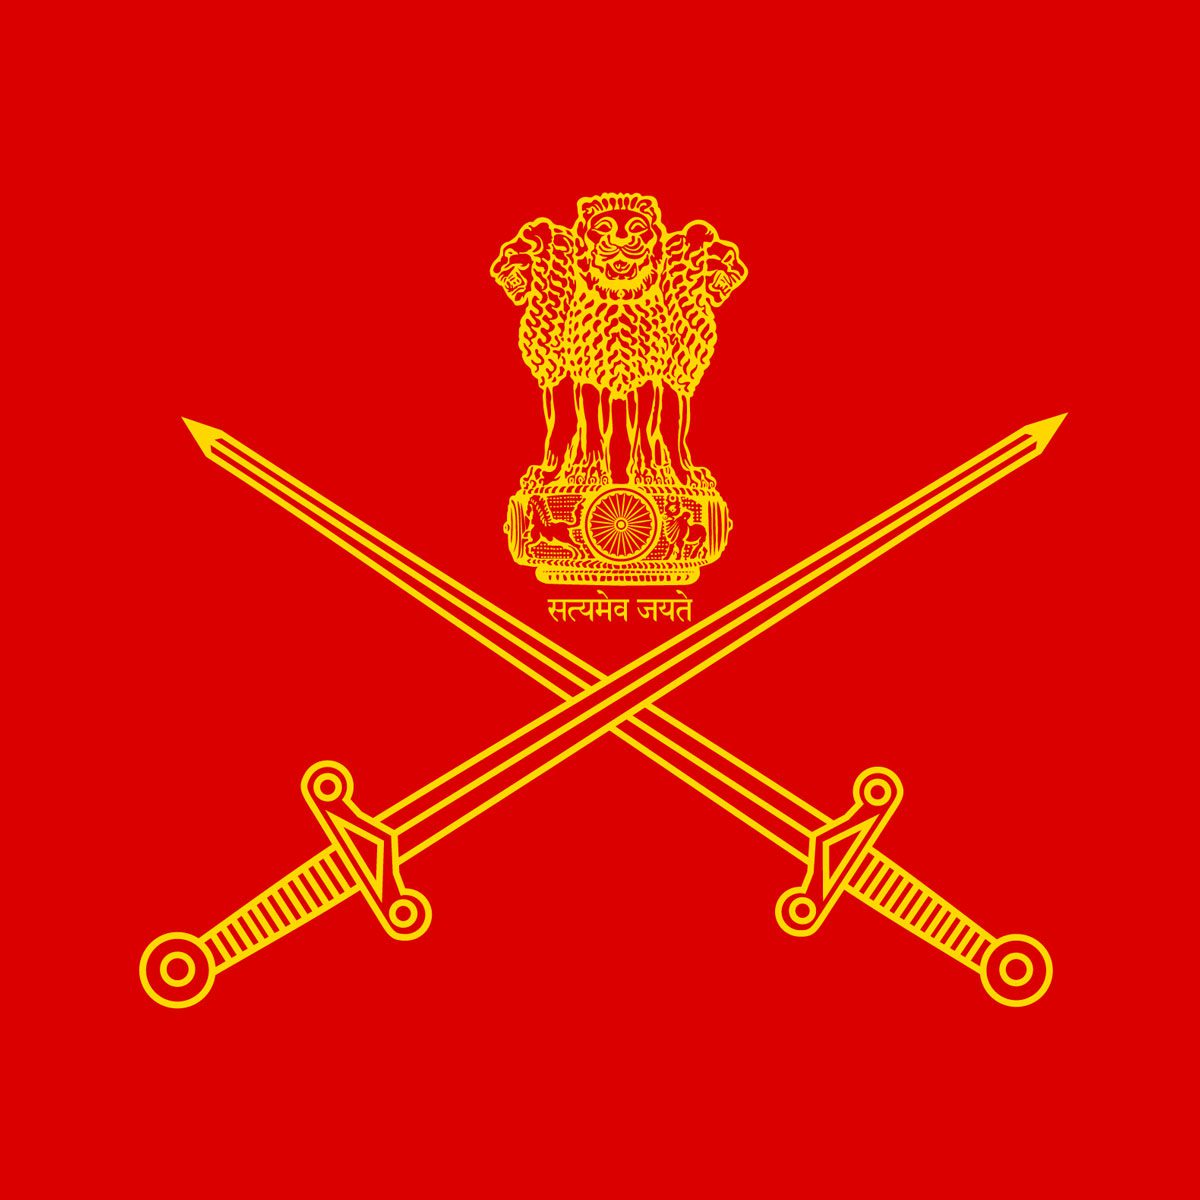 Indian Army Territorial Army Officer Recruitment - Indian Armed Forces Job Vacancies